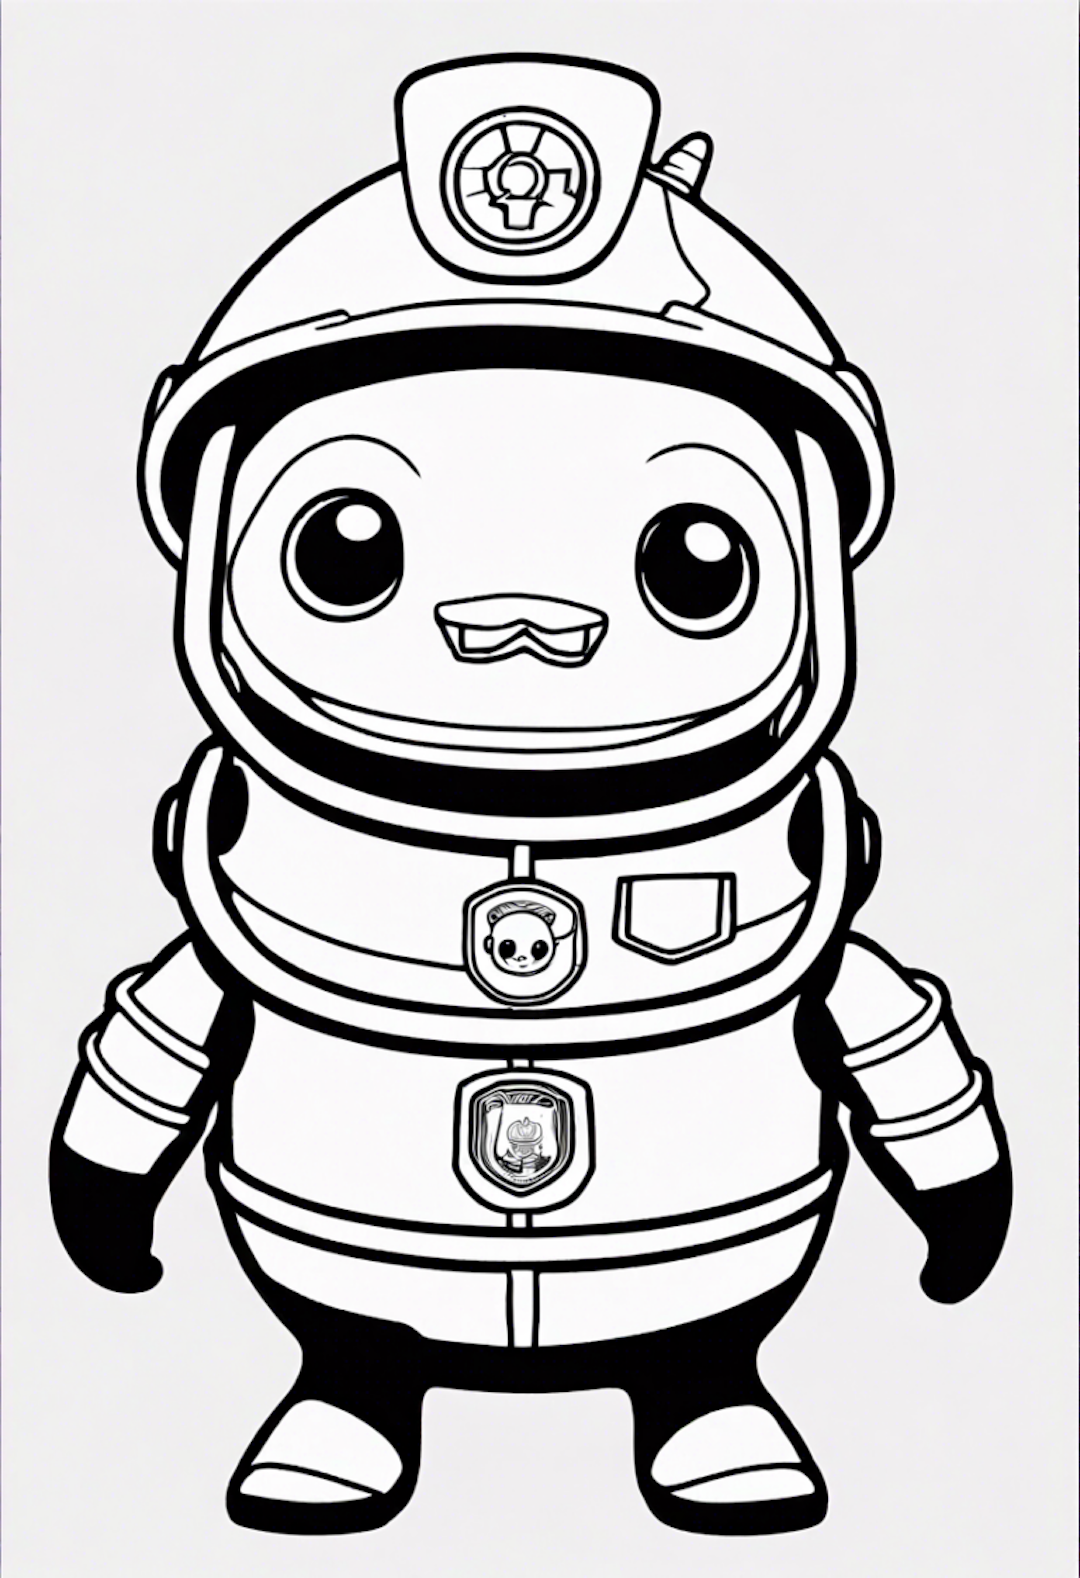 Paani the Brave Space Explorer coloring pages